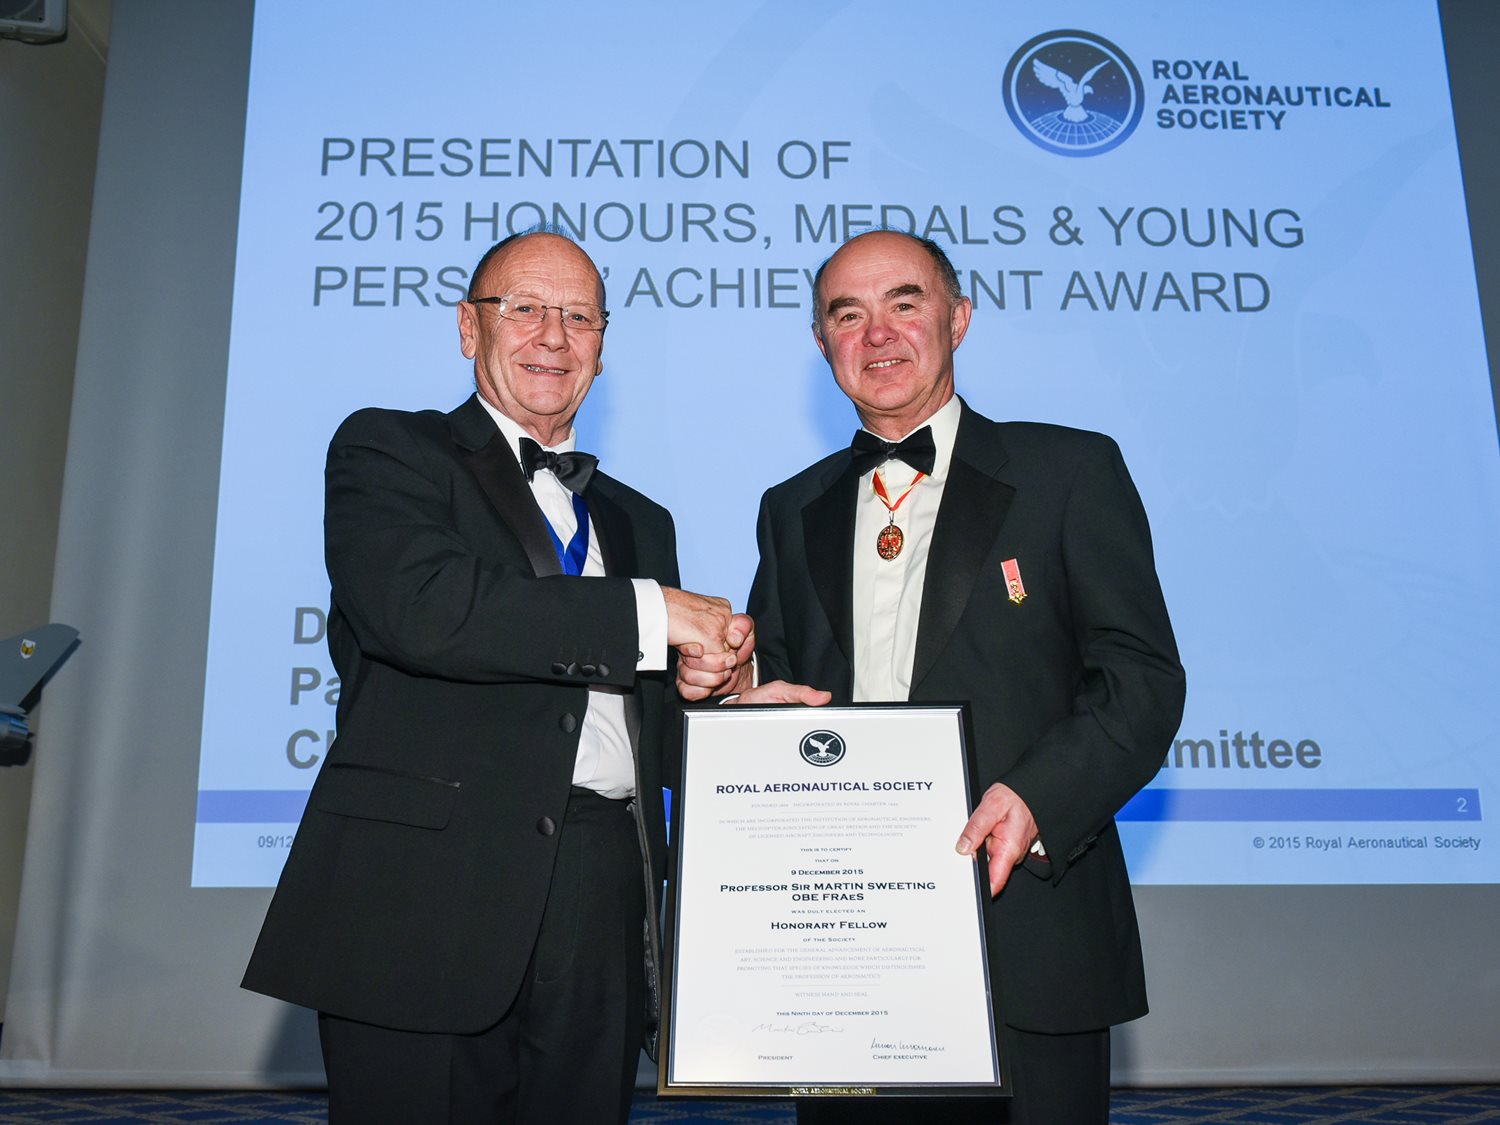 Sir Martin Sweeting awarded Honorary Fellowship by the RAeS